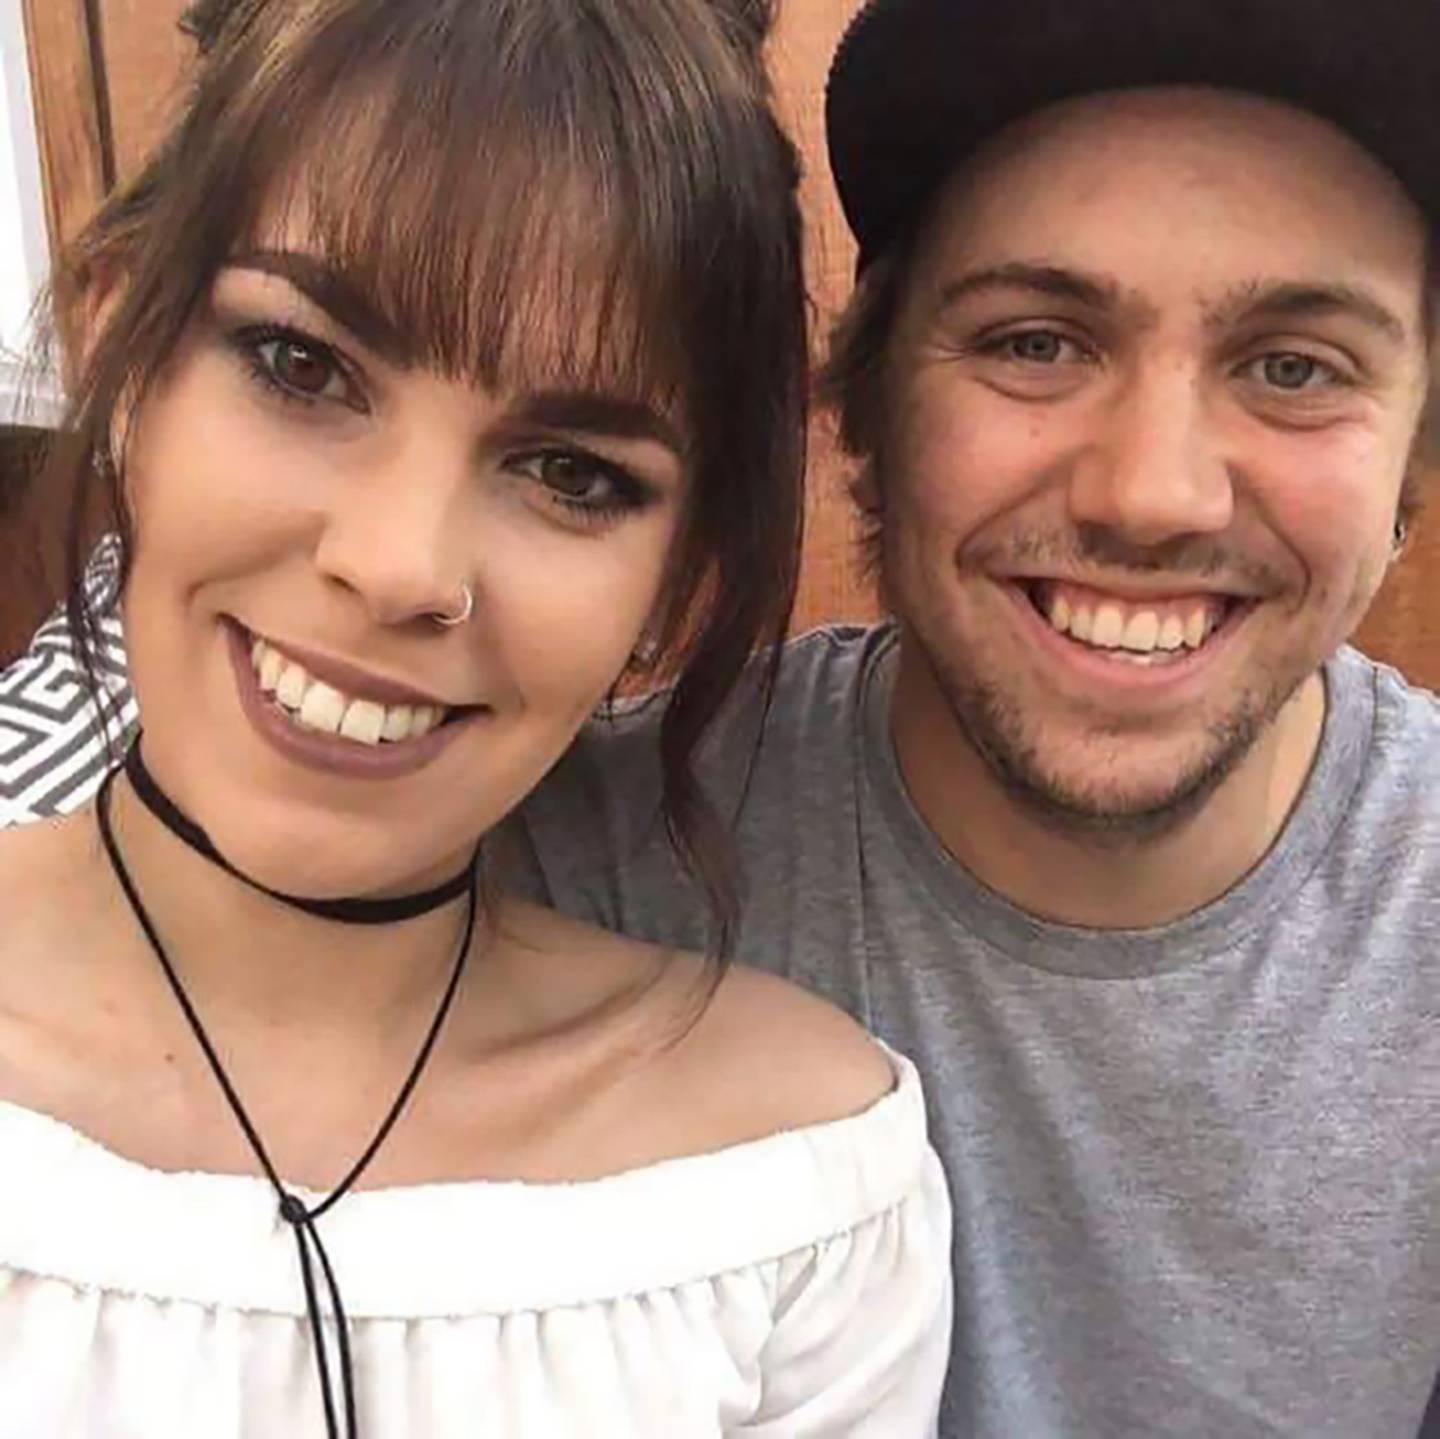 Rory Nairn aged 26 of Dunedin died 17 November. Pictured with fiancee Ashleigh Wilson. Photo / Supplied